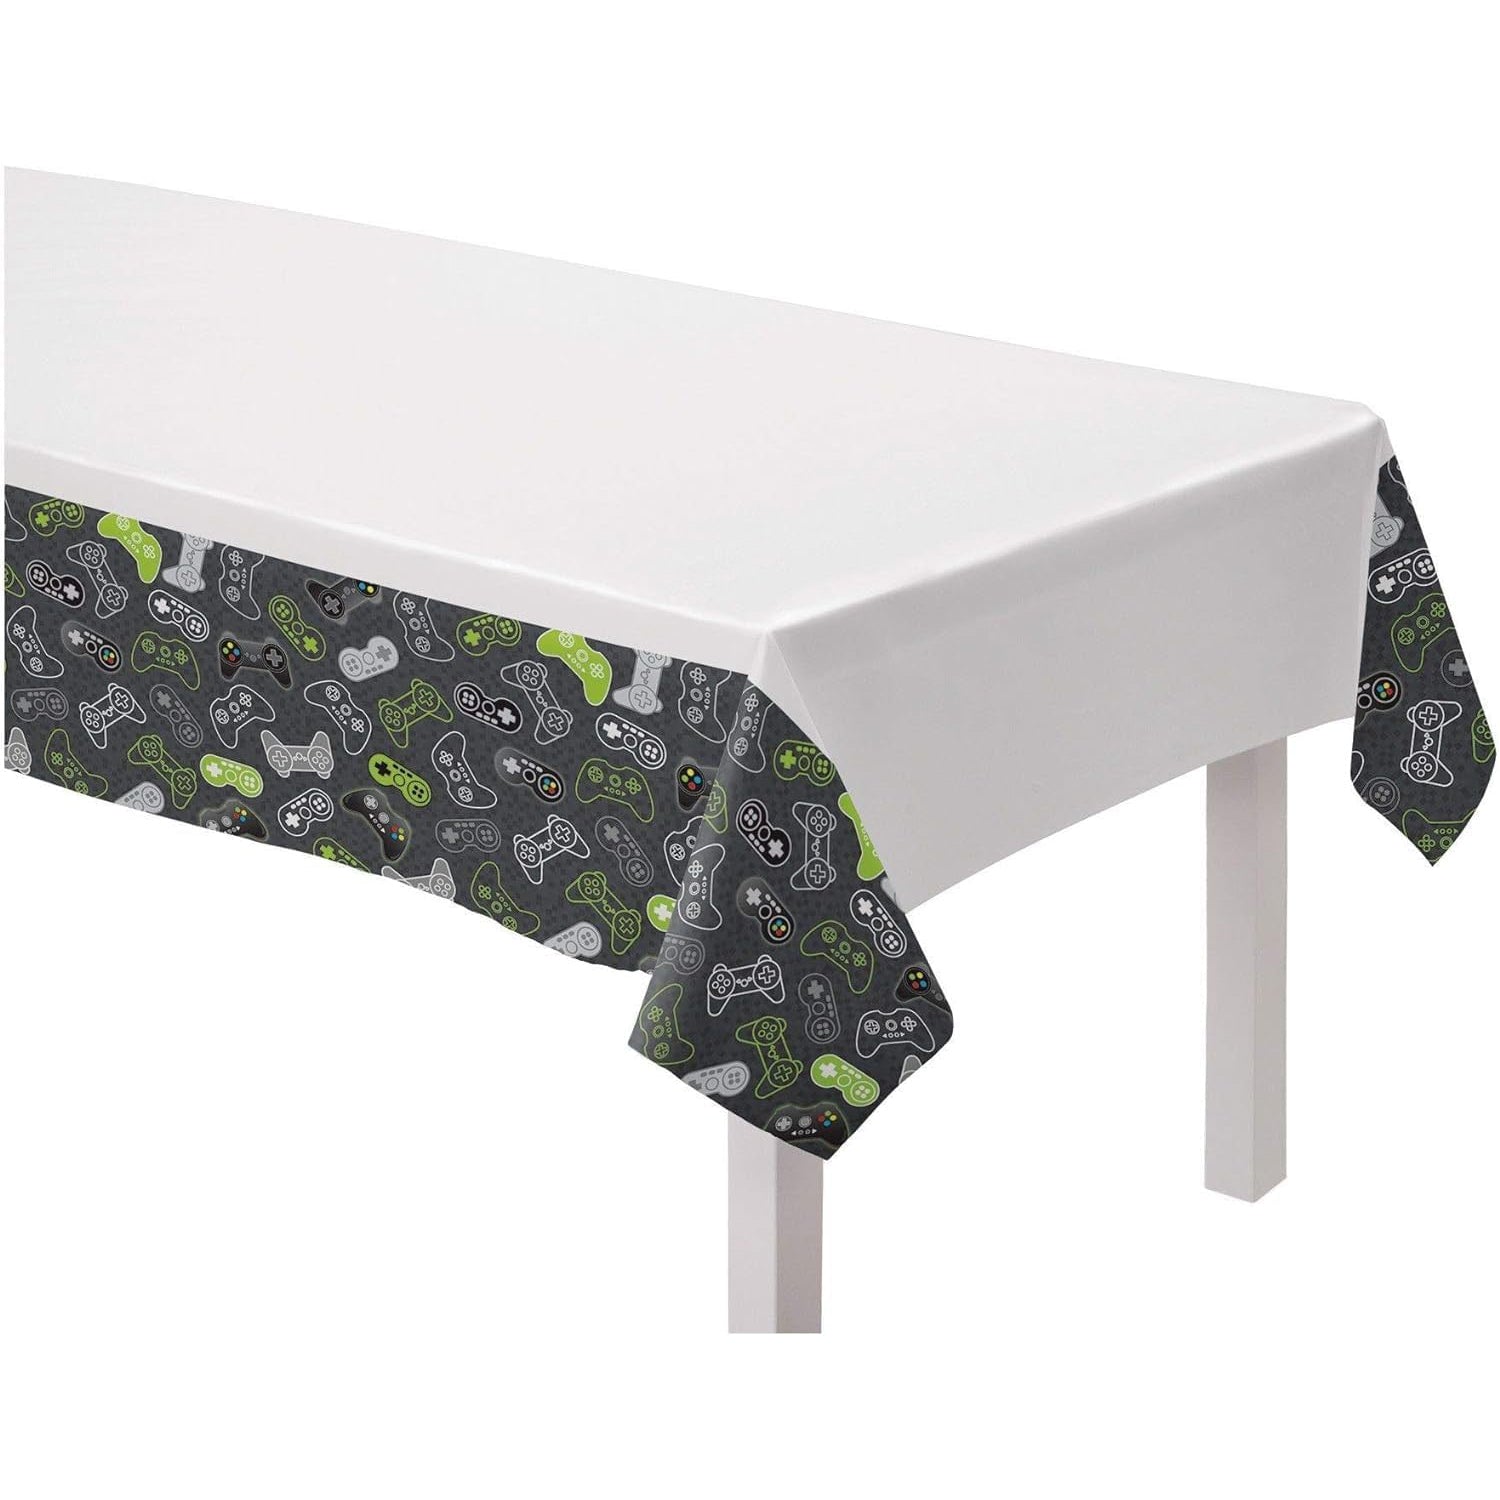 Level Up Plastic Table cover